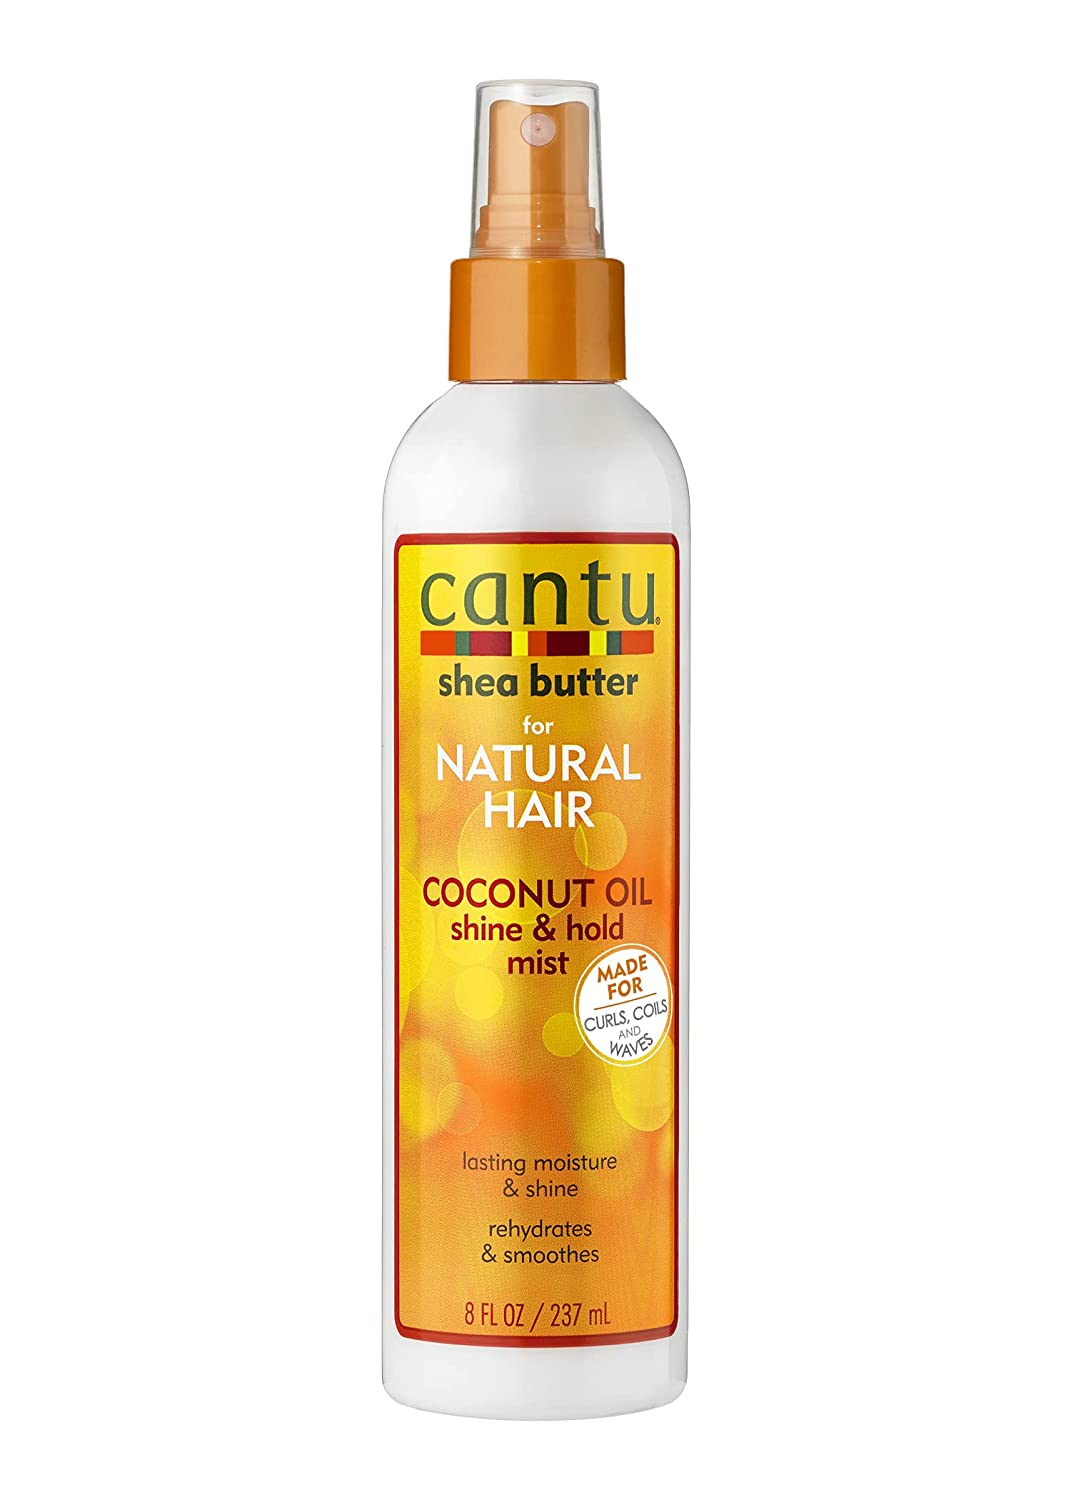 Cantu Shea Butter for Natural Hair Coconut Oil Shine and Hold Mist, 8 fl.oz / 237ml